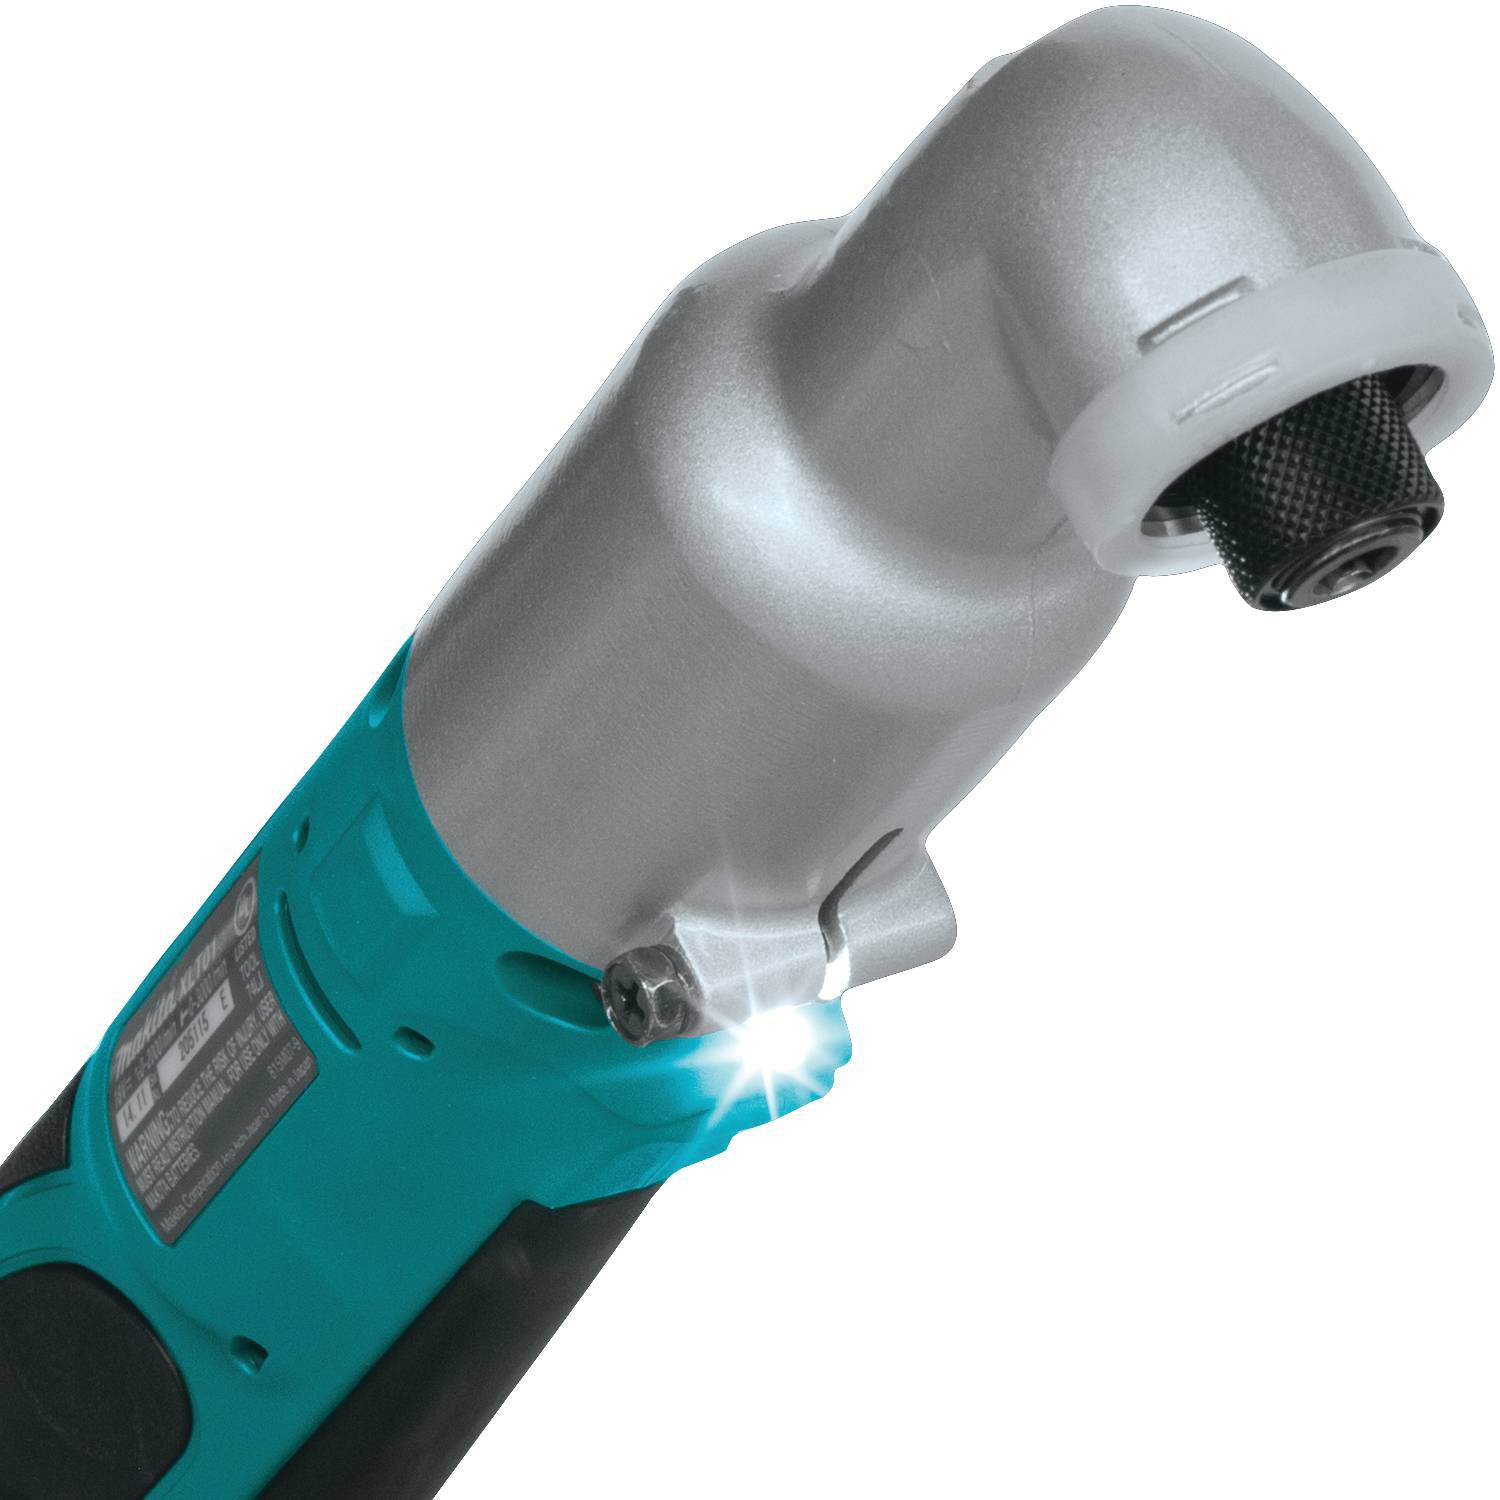 18V LXT Lithium‑Ion Cordless 1/4" Hex Angle Impact Driver (Tool Only)